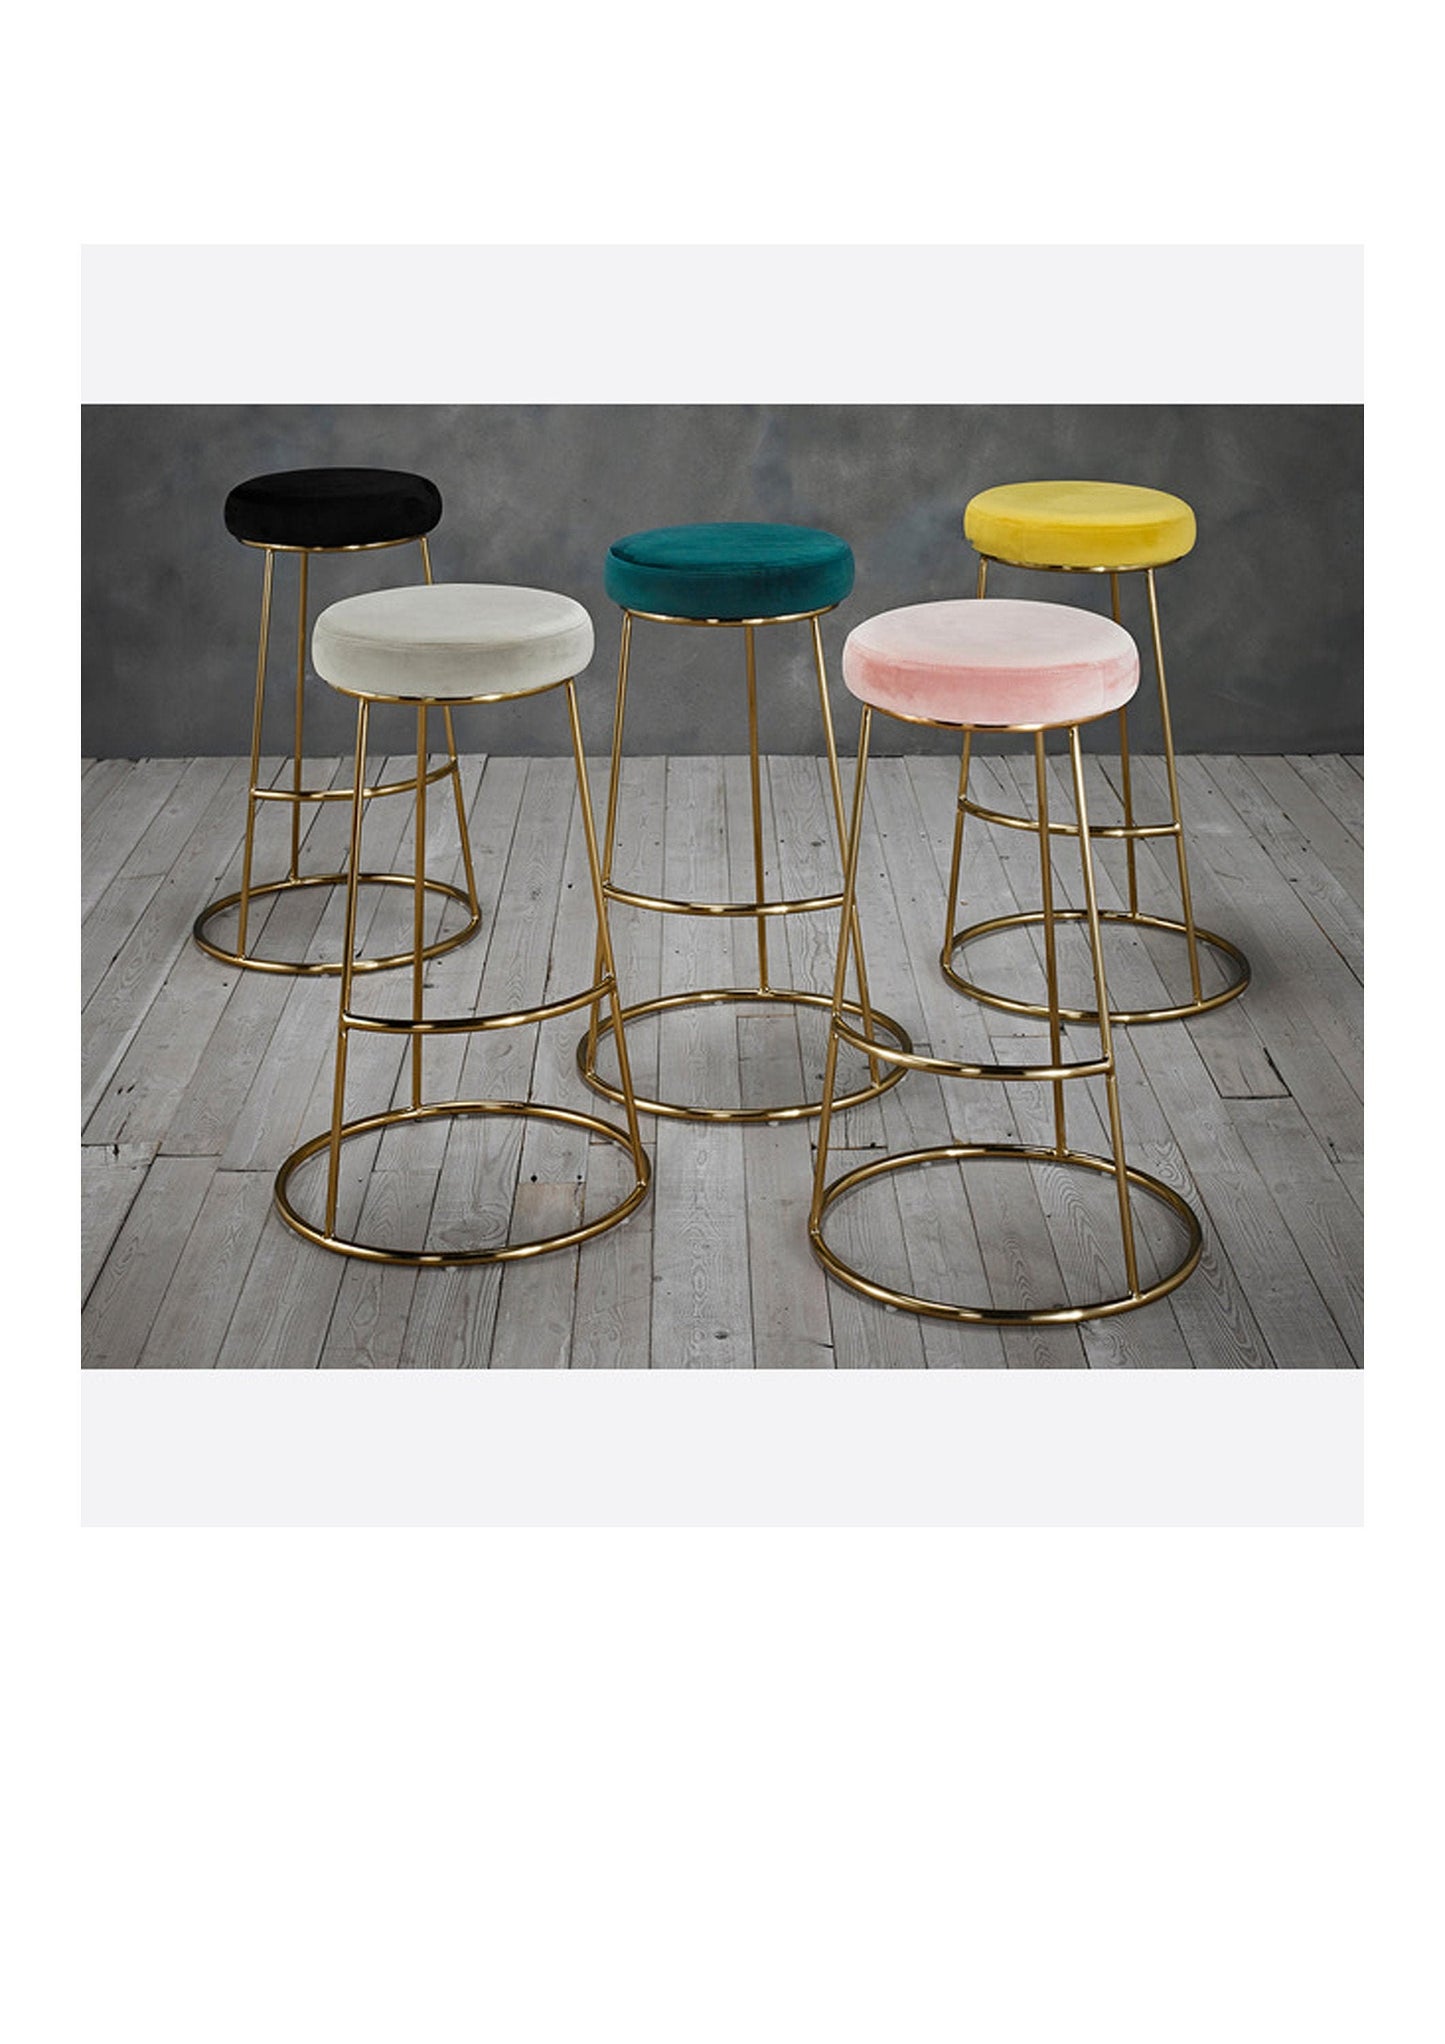 New! Luxury velvet bar stool with gold base in Pink/ Yellow/ Teal/ Cream - Pack of 2